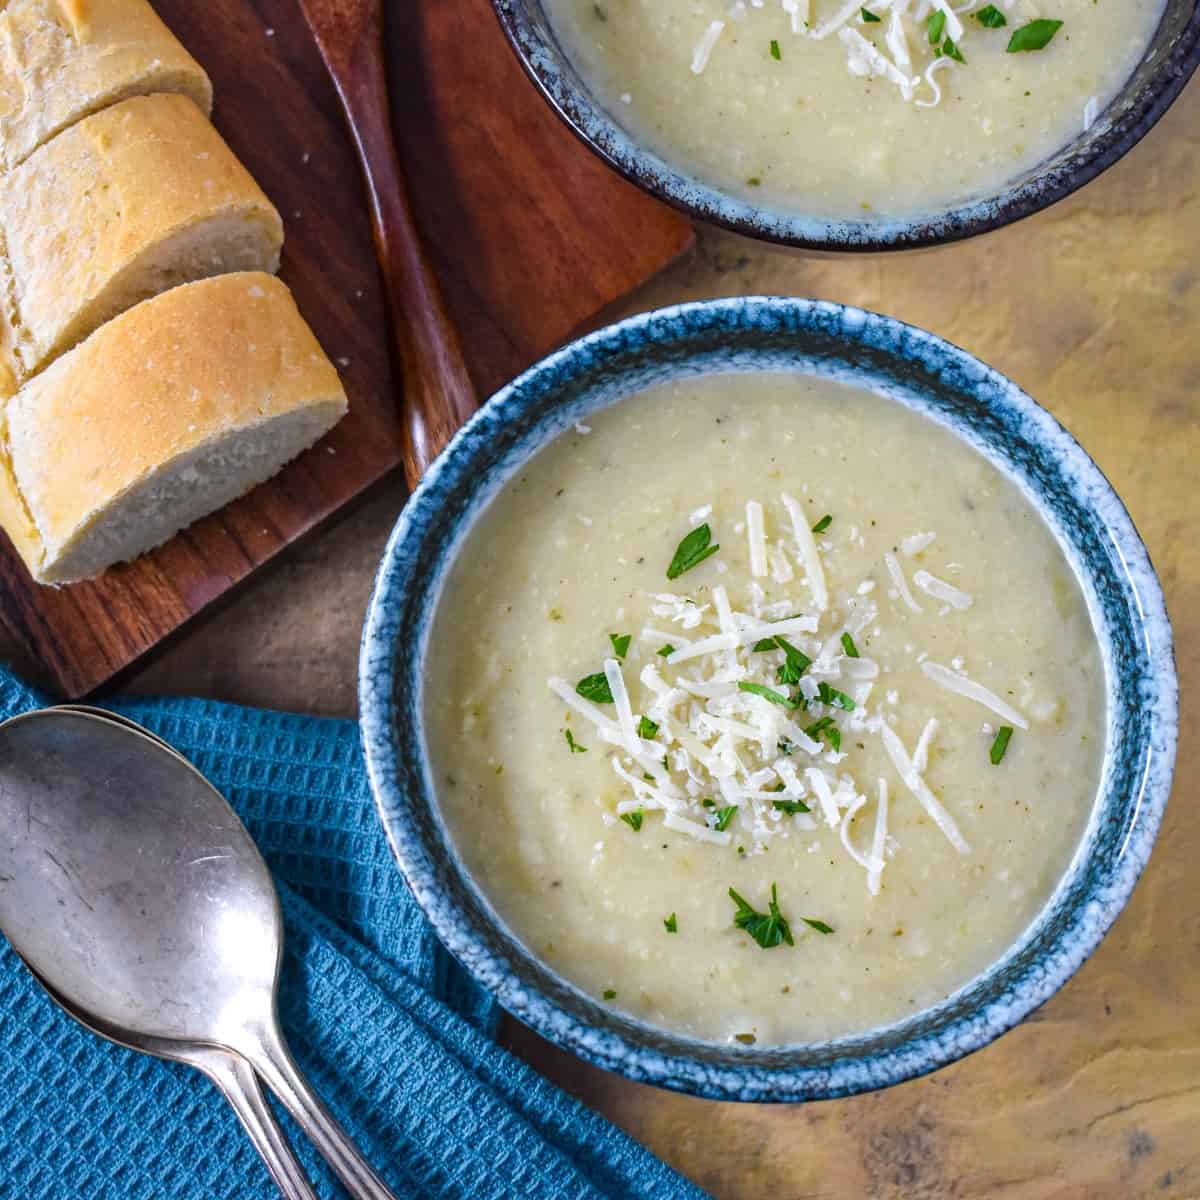 A close-up of the creamy artichoke soup garnished with parsley and parmesan cheese with sliced bread rounds and two spoons to the lefthand side.